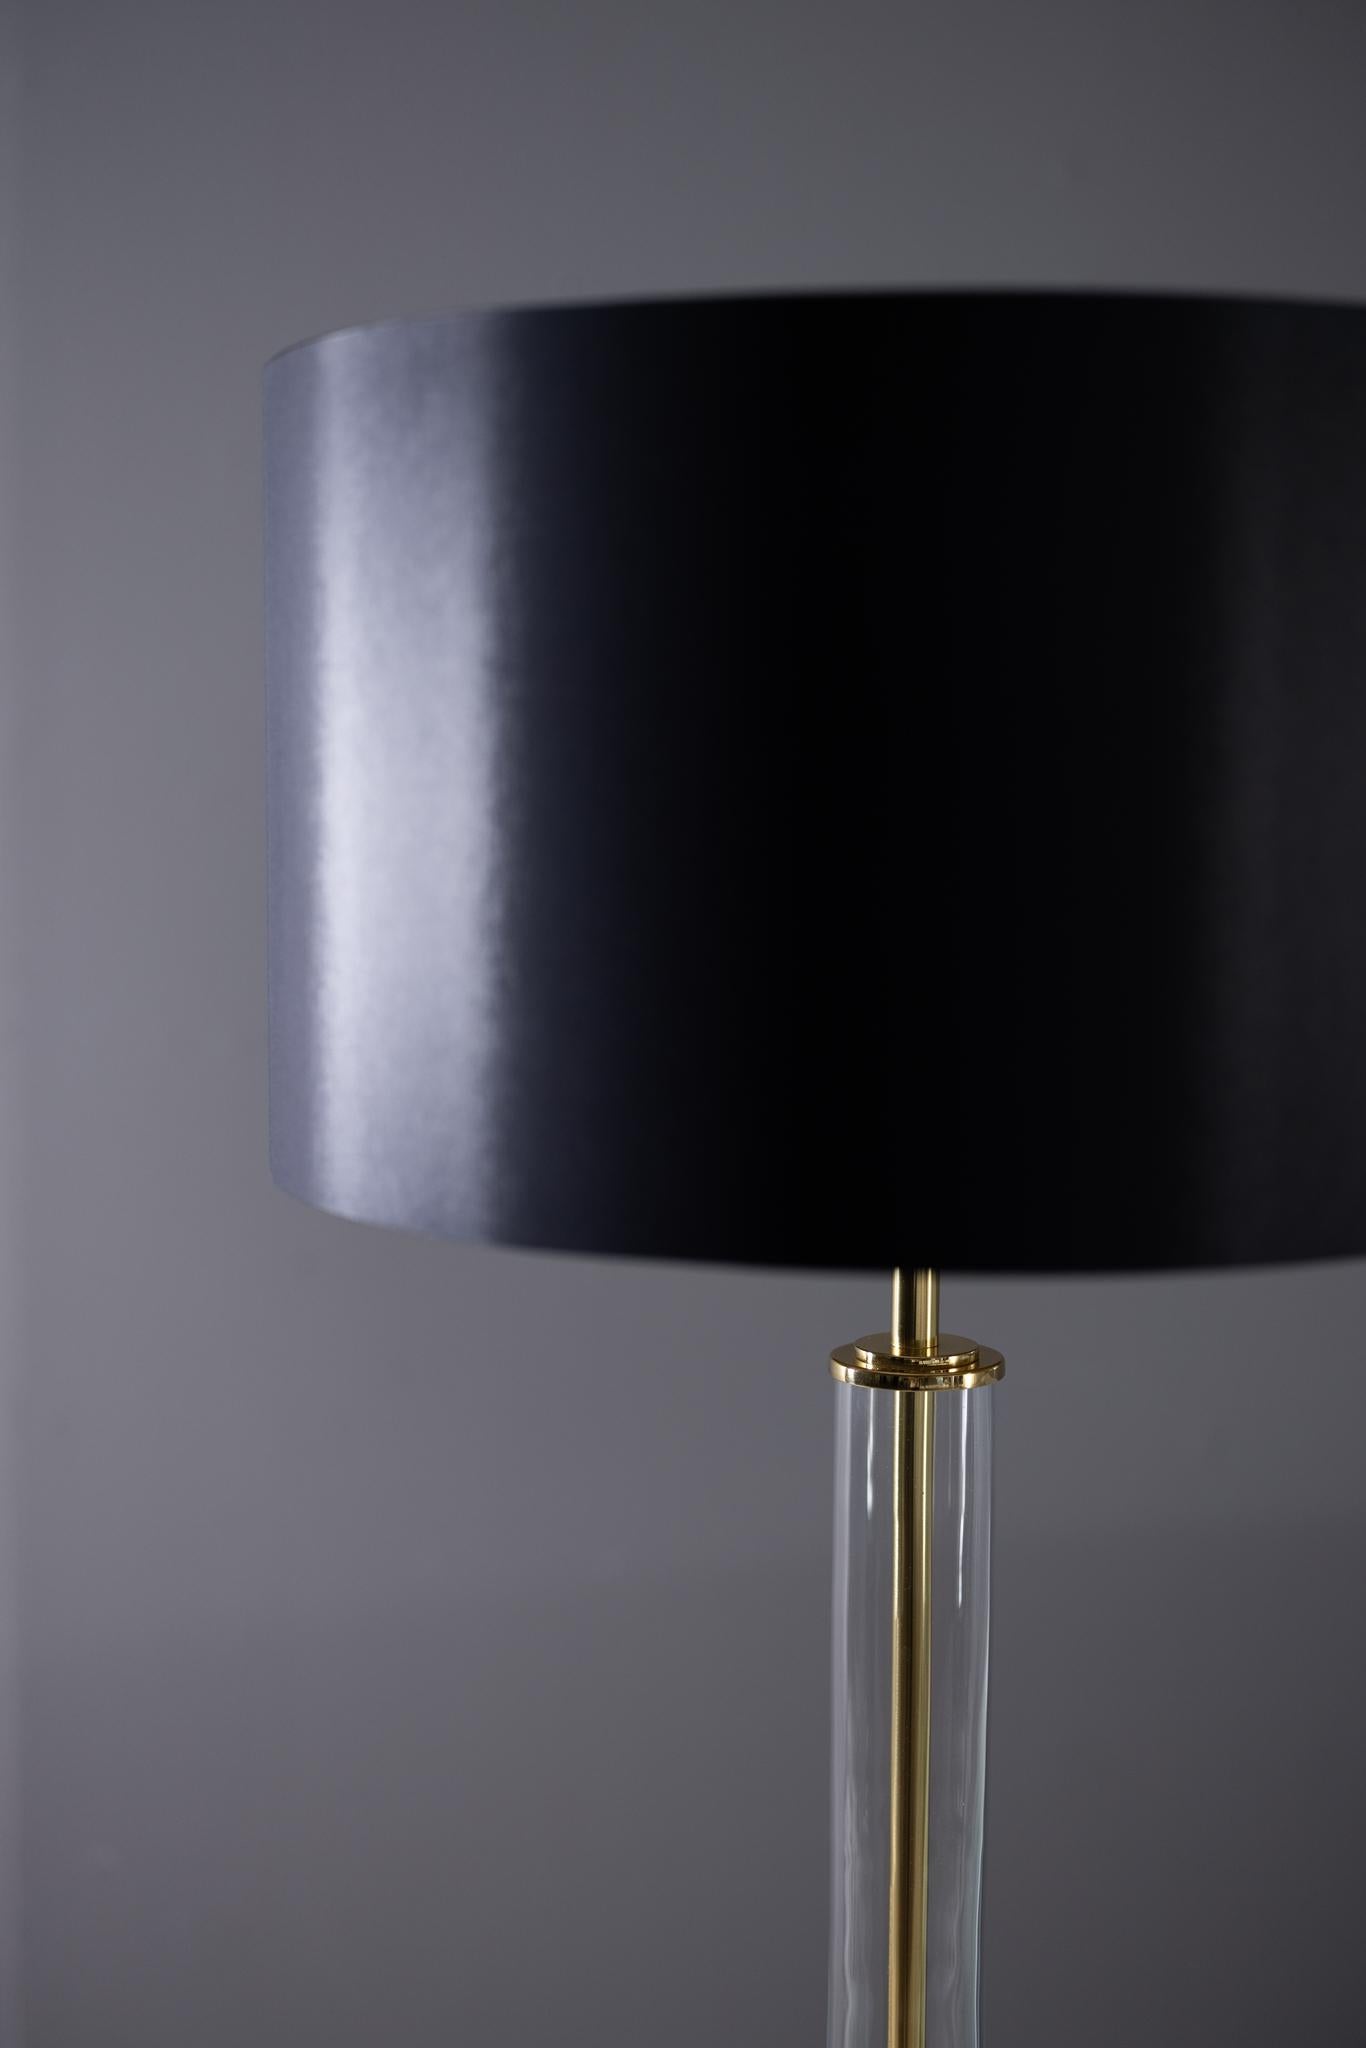 Set of 2 Art Deco Table Lamps, Vaz Table Lamp, Black Shade, Handmade in Portugal For Sale 2